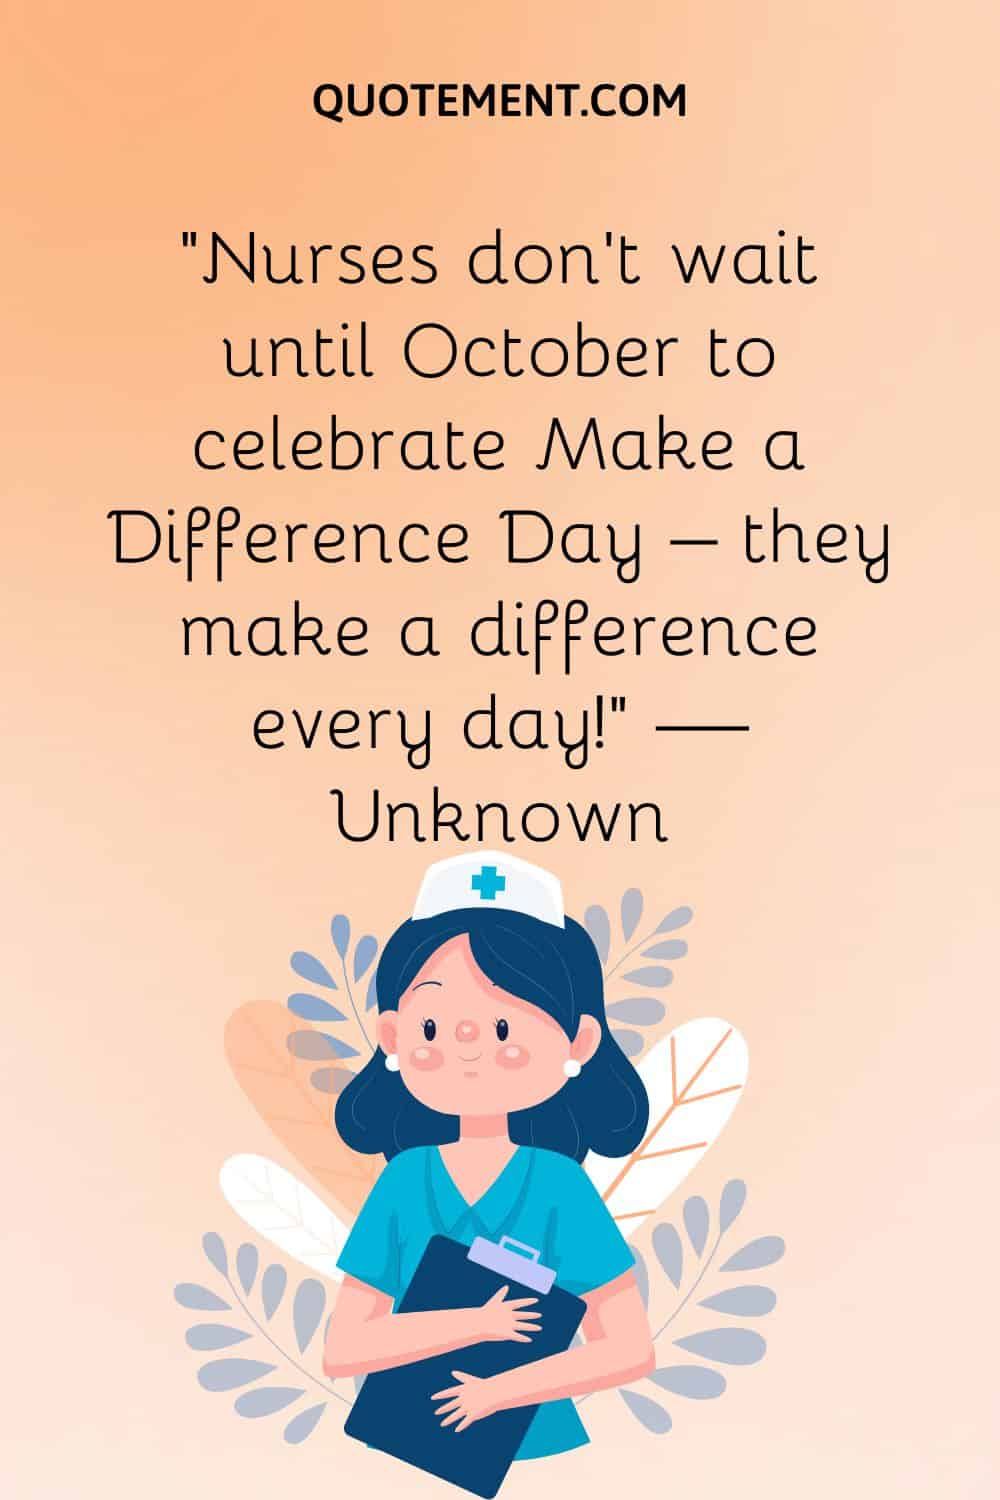 “Nurses don’t wait until October to celebrate Make a Difference Day – they make a difference every day!” — Unknown